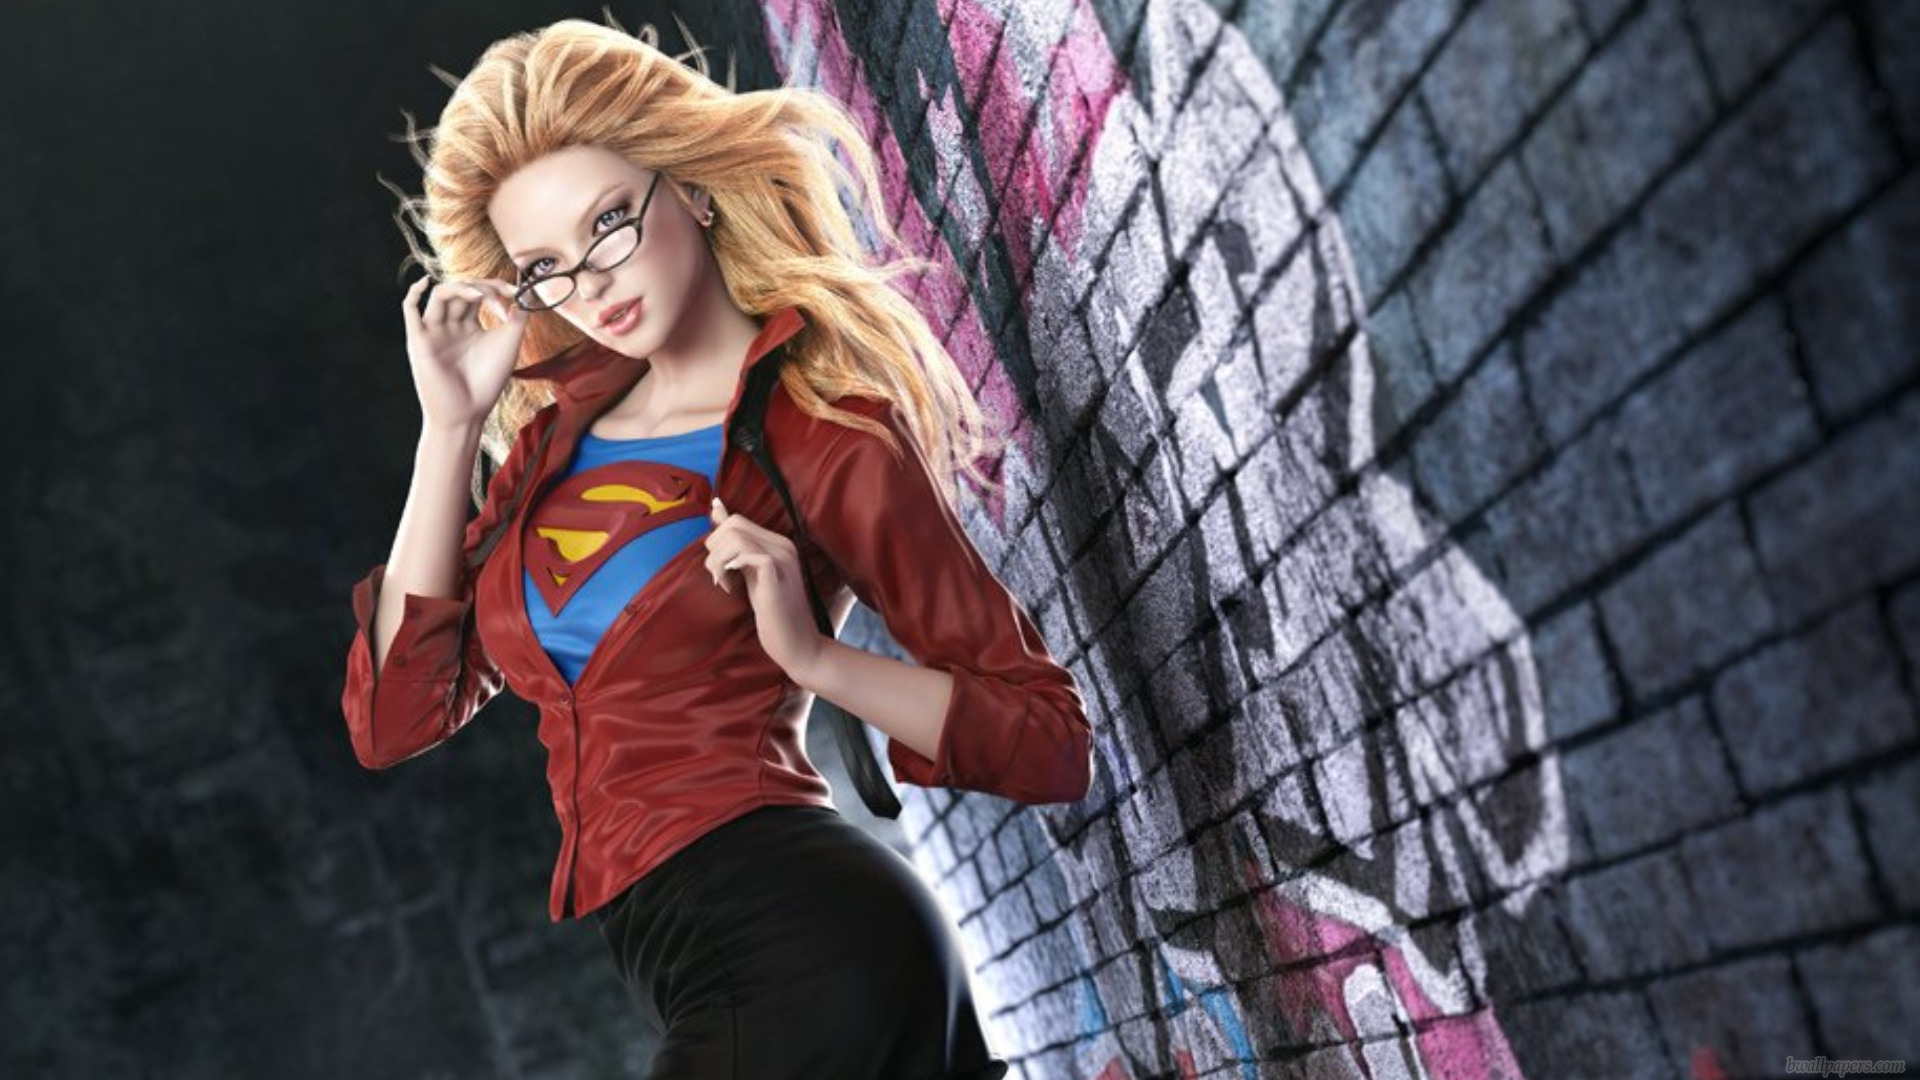 Supergirl Wallpapers - Wallpaper, High Definition, High Quality ...